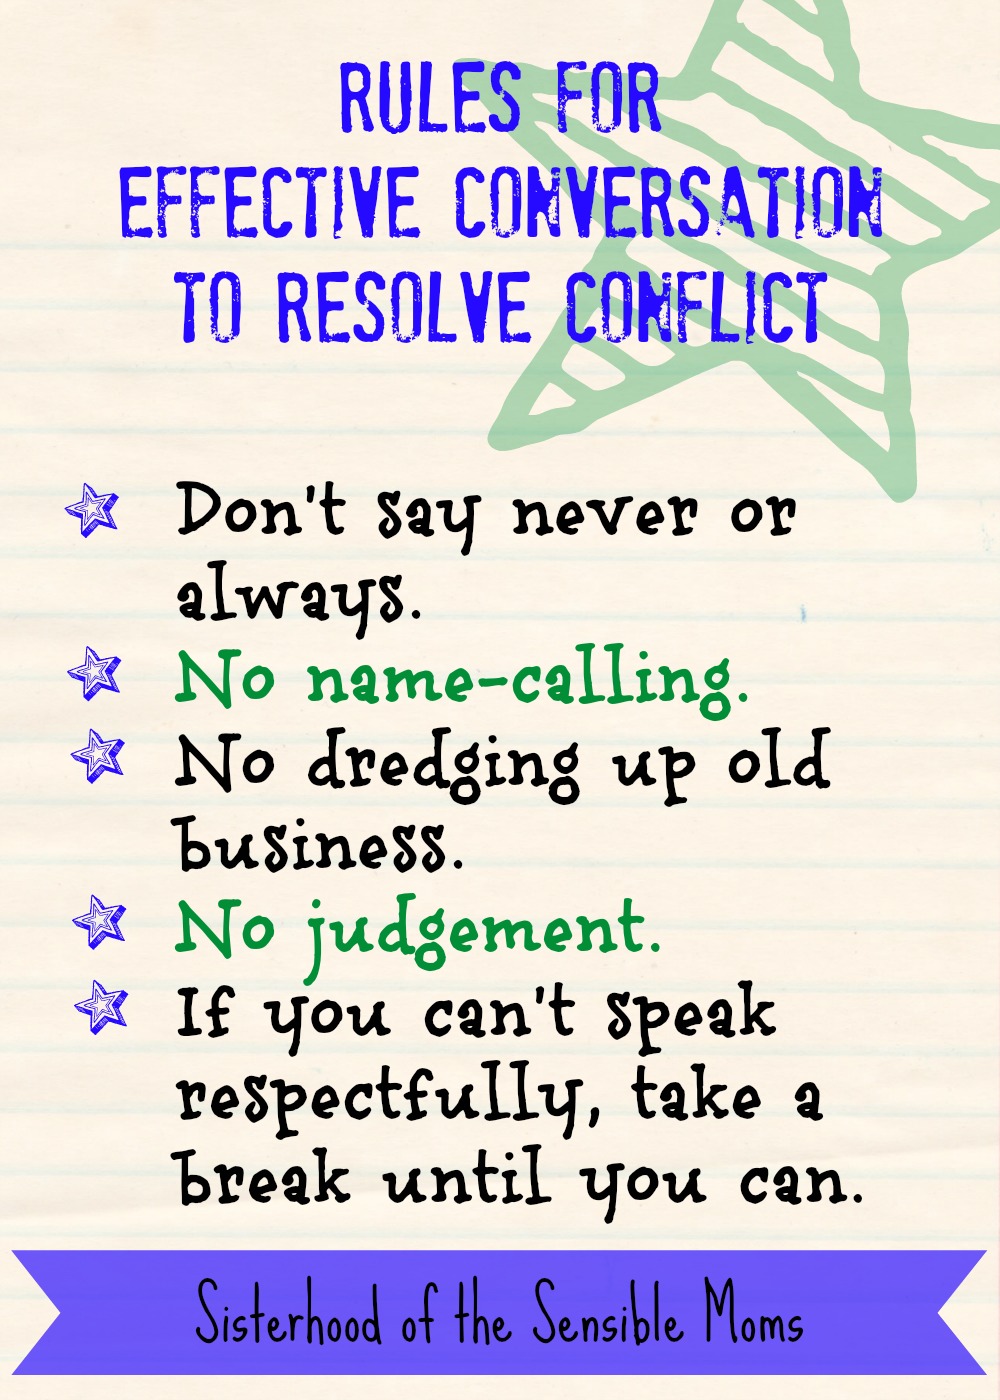 Rules for effective conversation to resolve conflict. Helpful teen parenting guide with tips for How to Talk to Your Kids about Dating | Parenting Advice | Sisterhood of the Sensible Moms